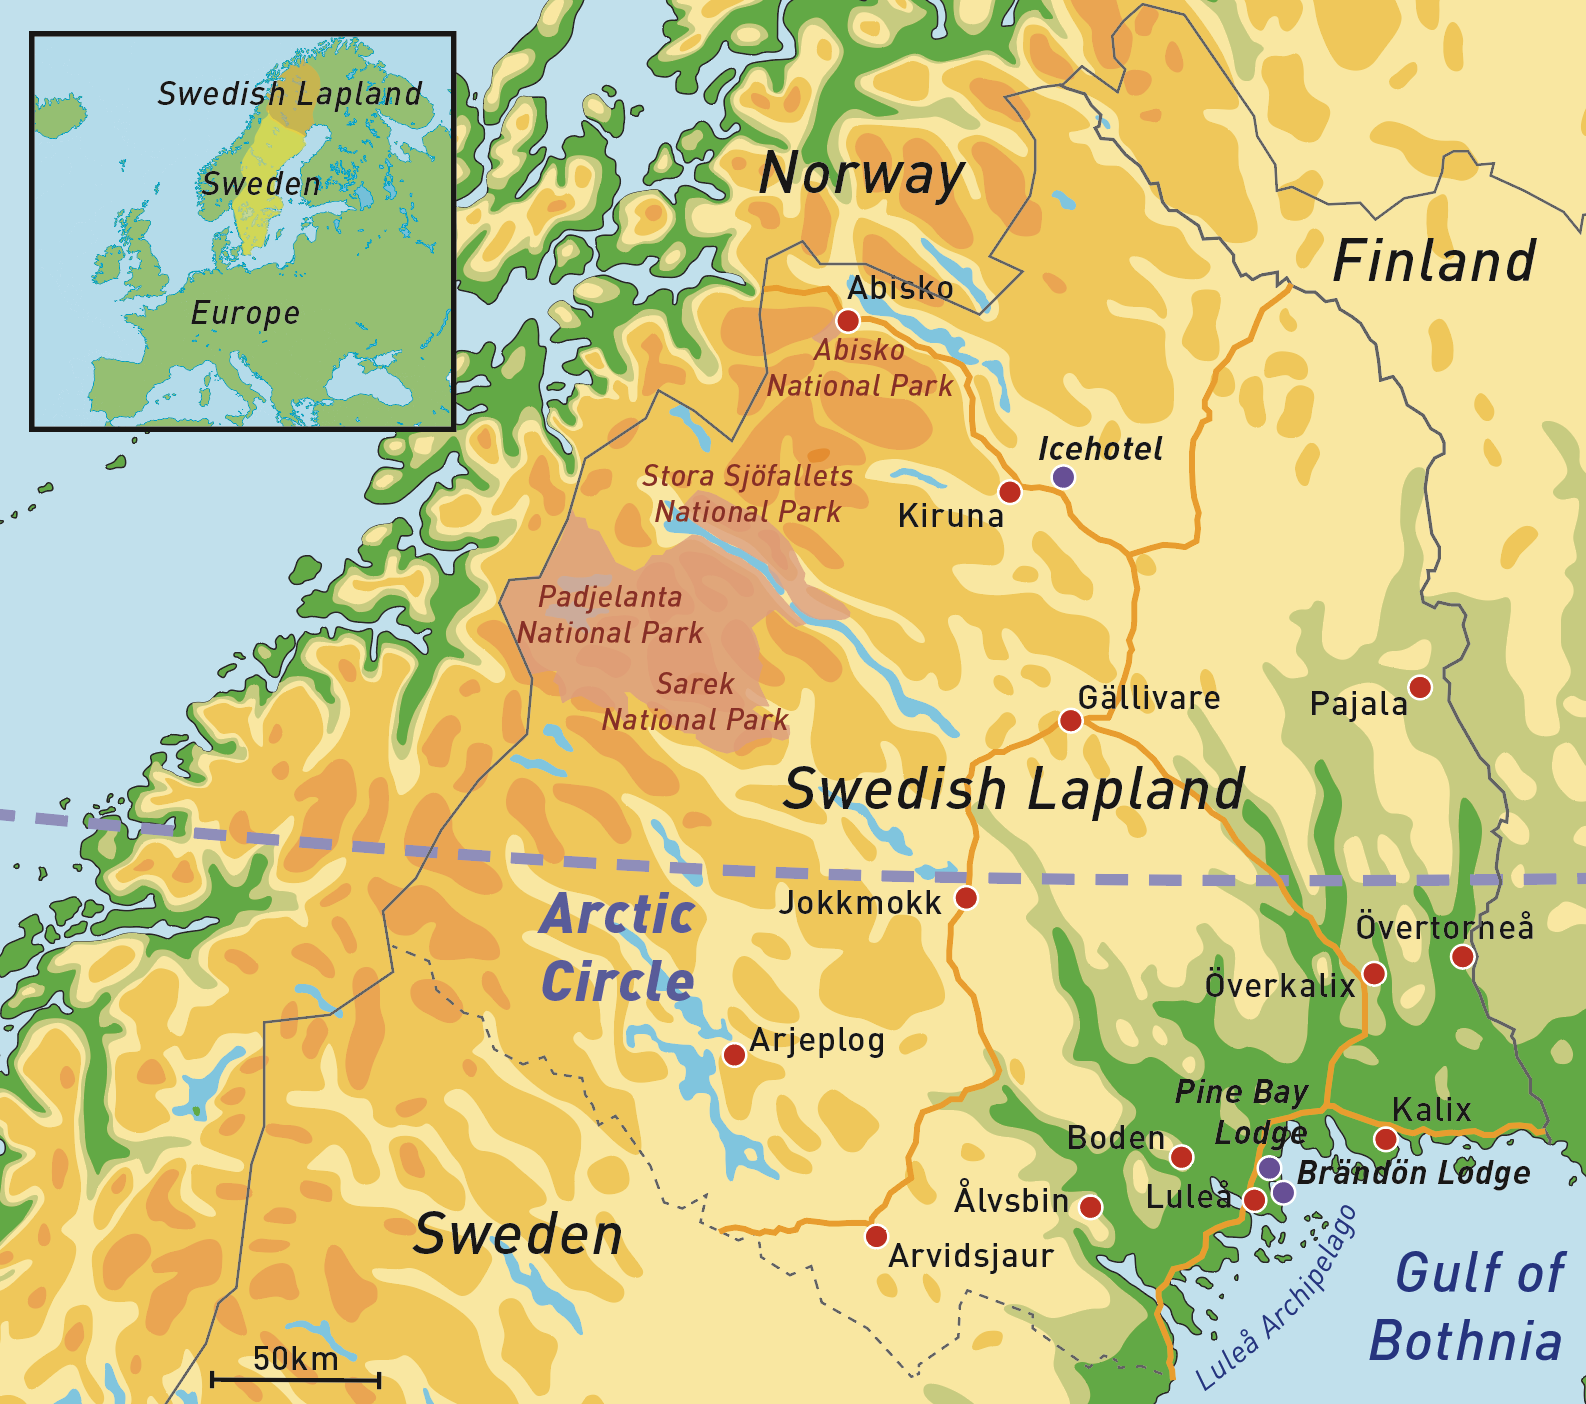 > Swedish Lapland, the Arctic north of Sweden: Luleå, Pine Bay Lodge and Brändön Lodge are shown in the south east; Kiruna and the nearby Icehotel are in the north.